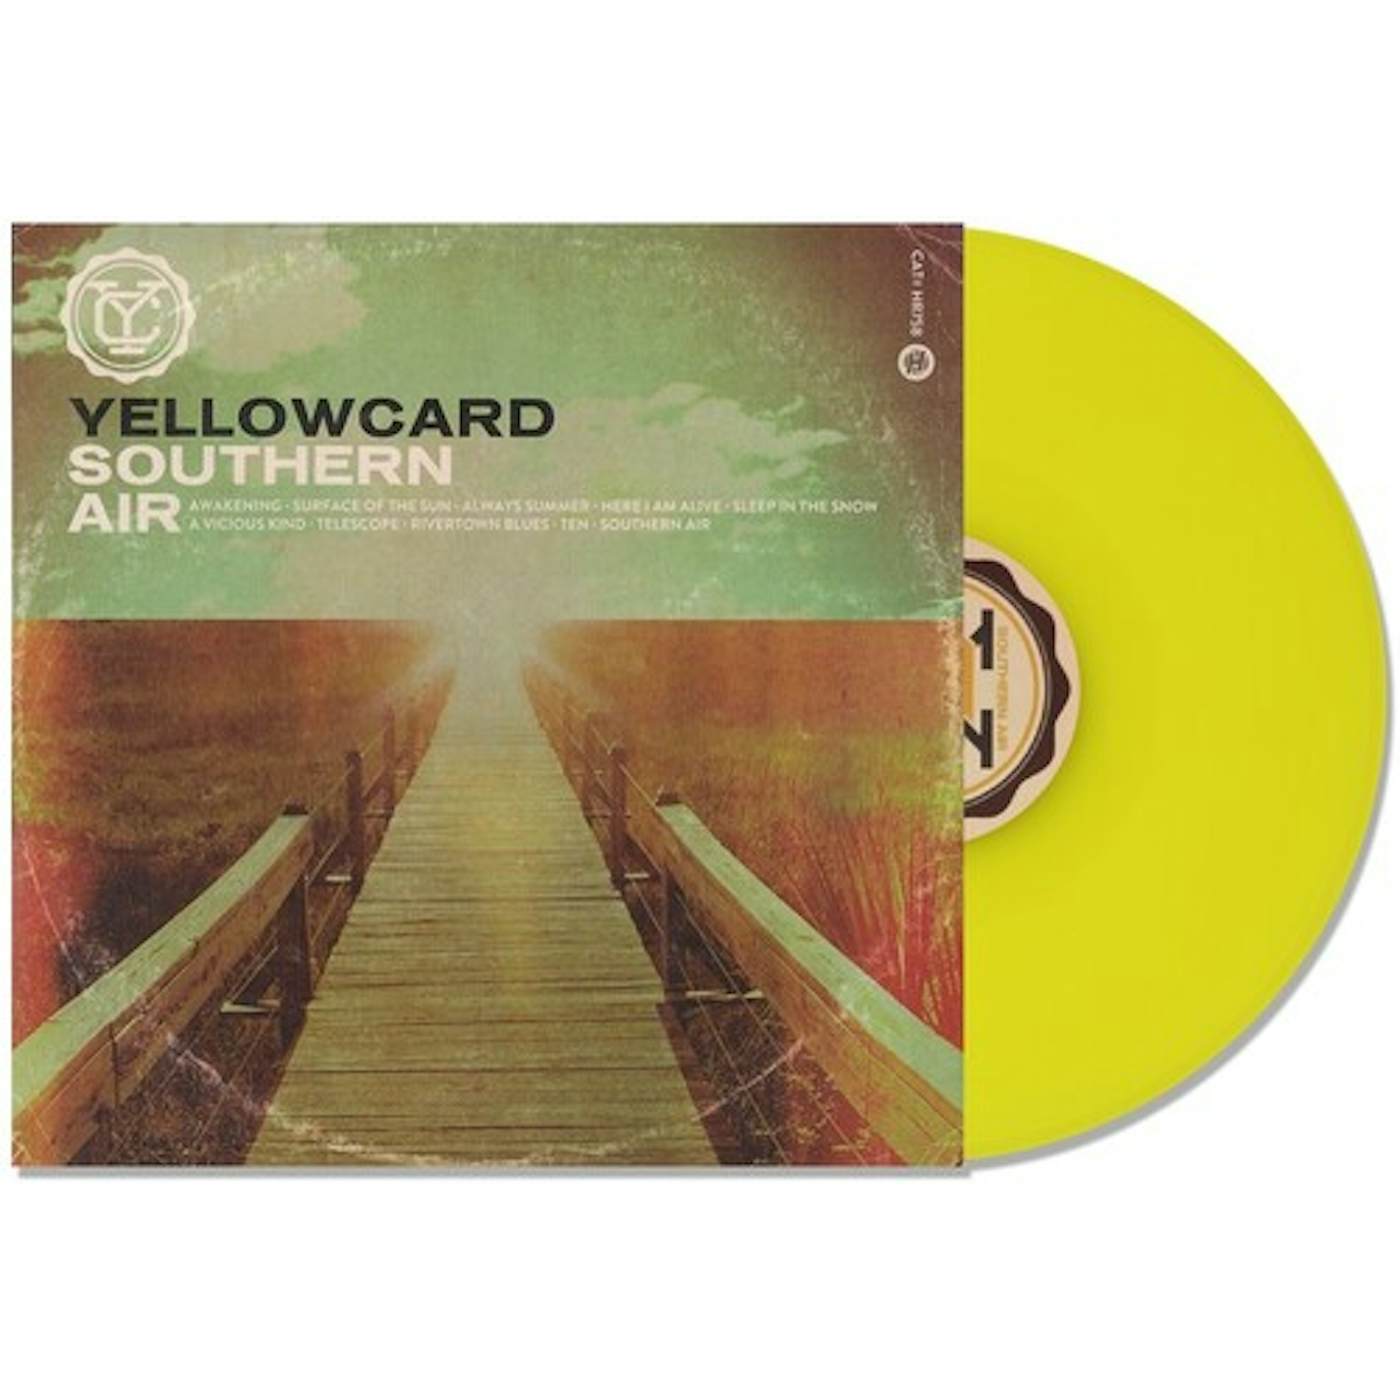 Yellowcard Southern Air (Yellow/Explicit Content) Vinyl Record